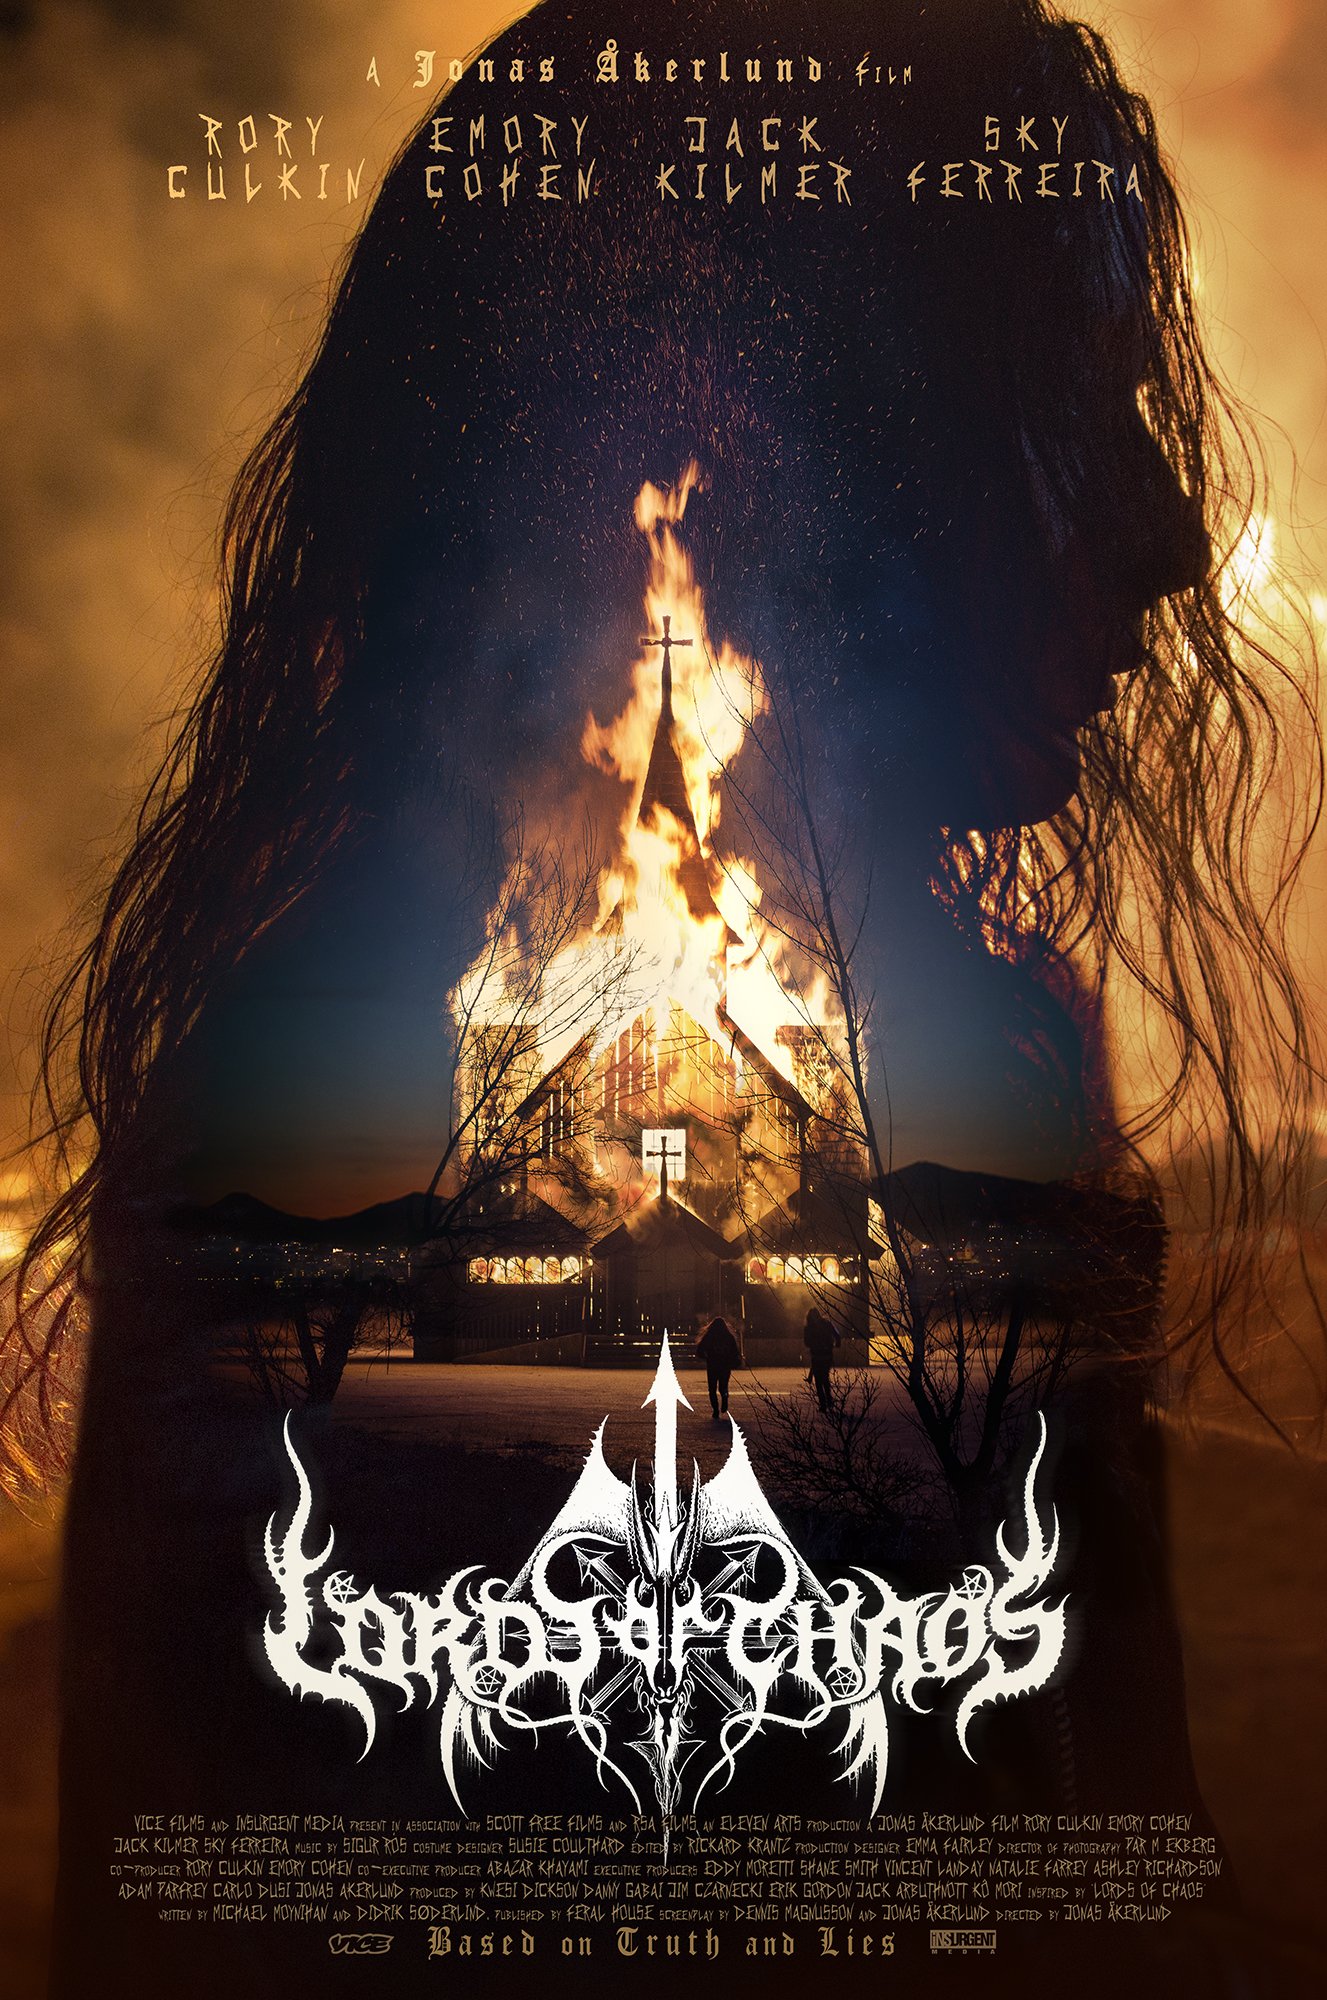 Lords Of Chaos (presented by Clameur De Cinema) – Guernsey Gigs